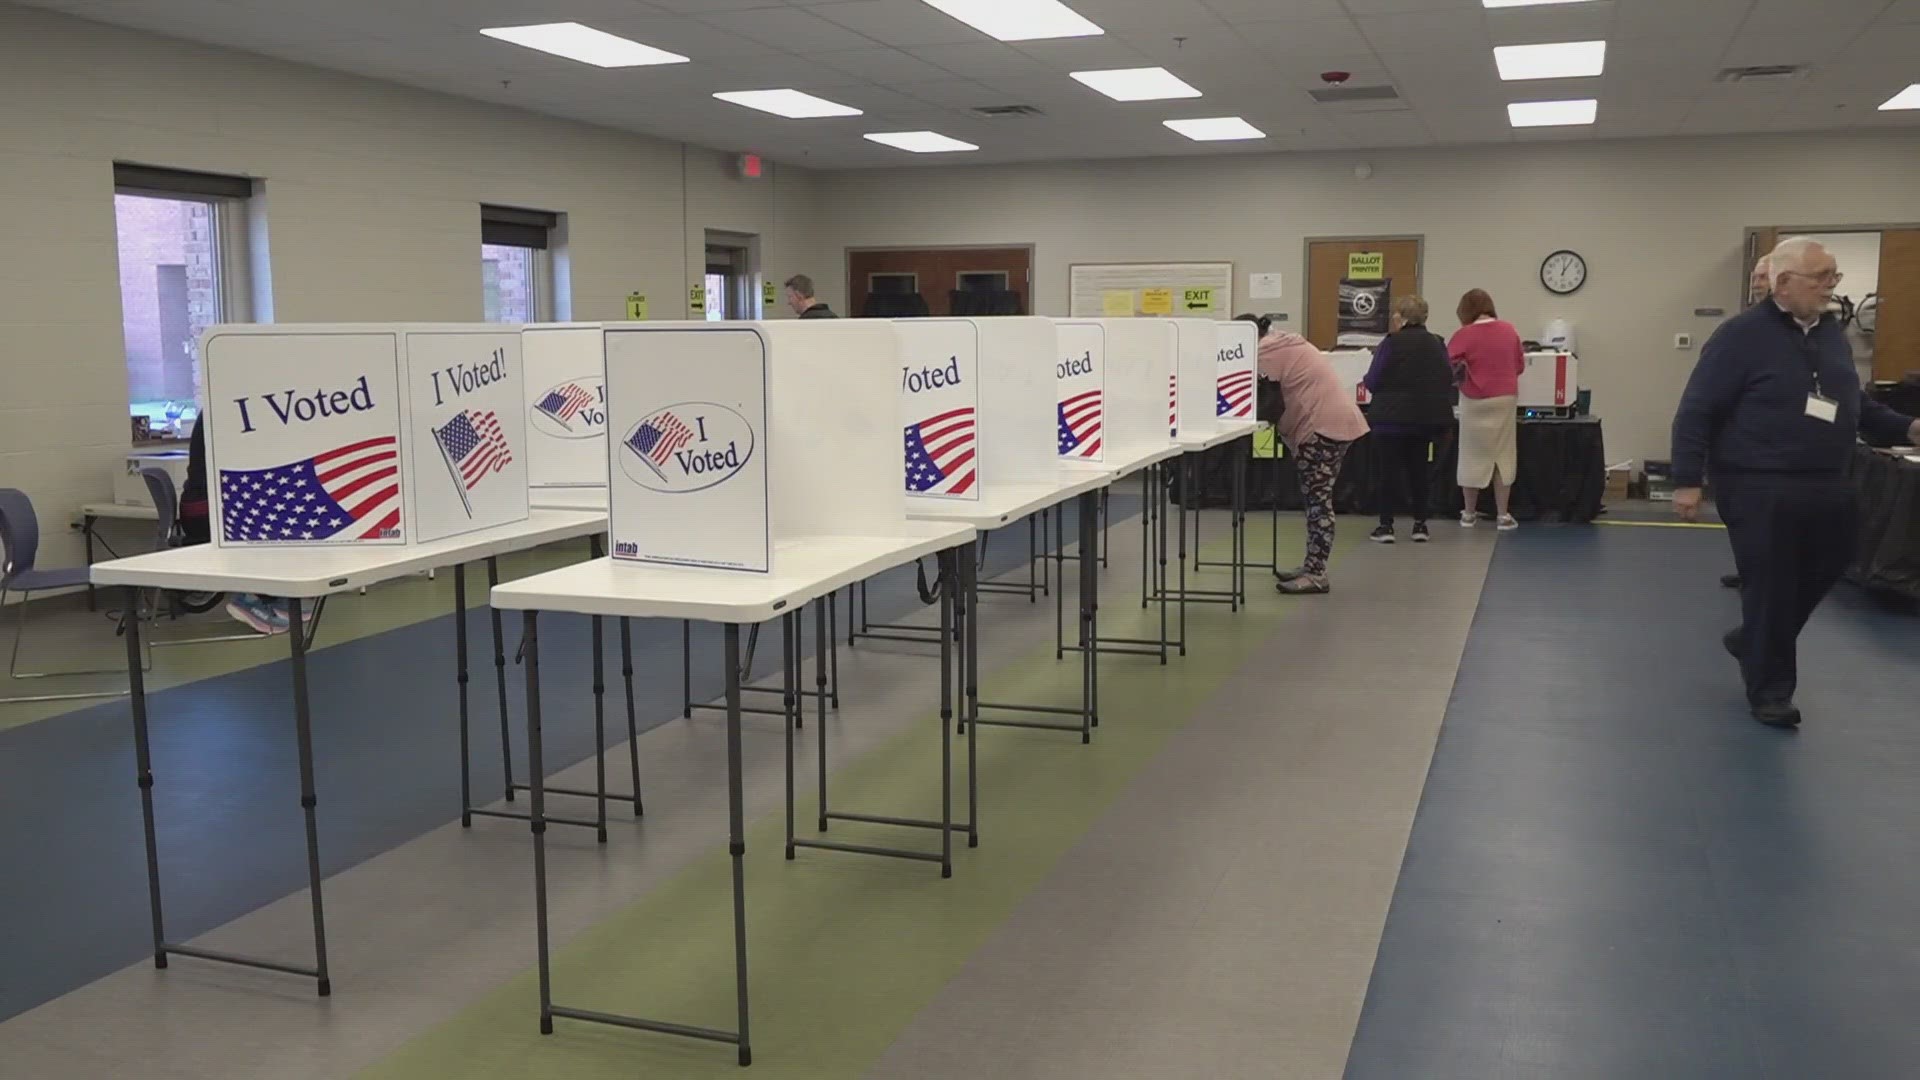 We want to find out how things are going at the polls in Knox County.